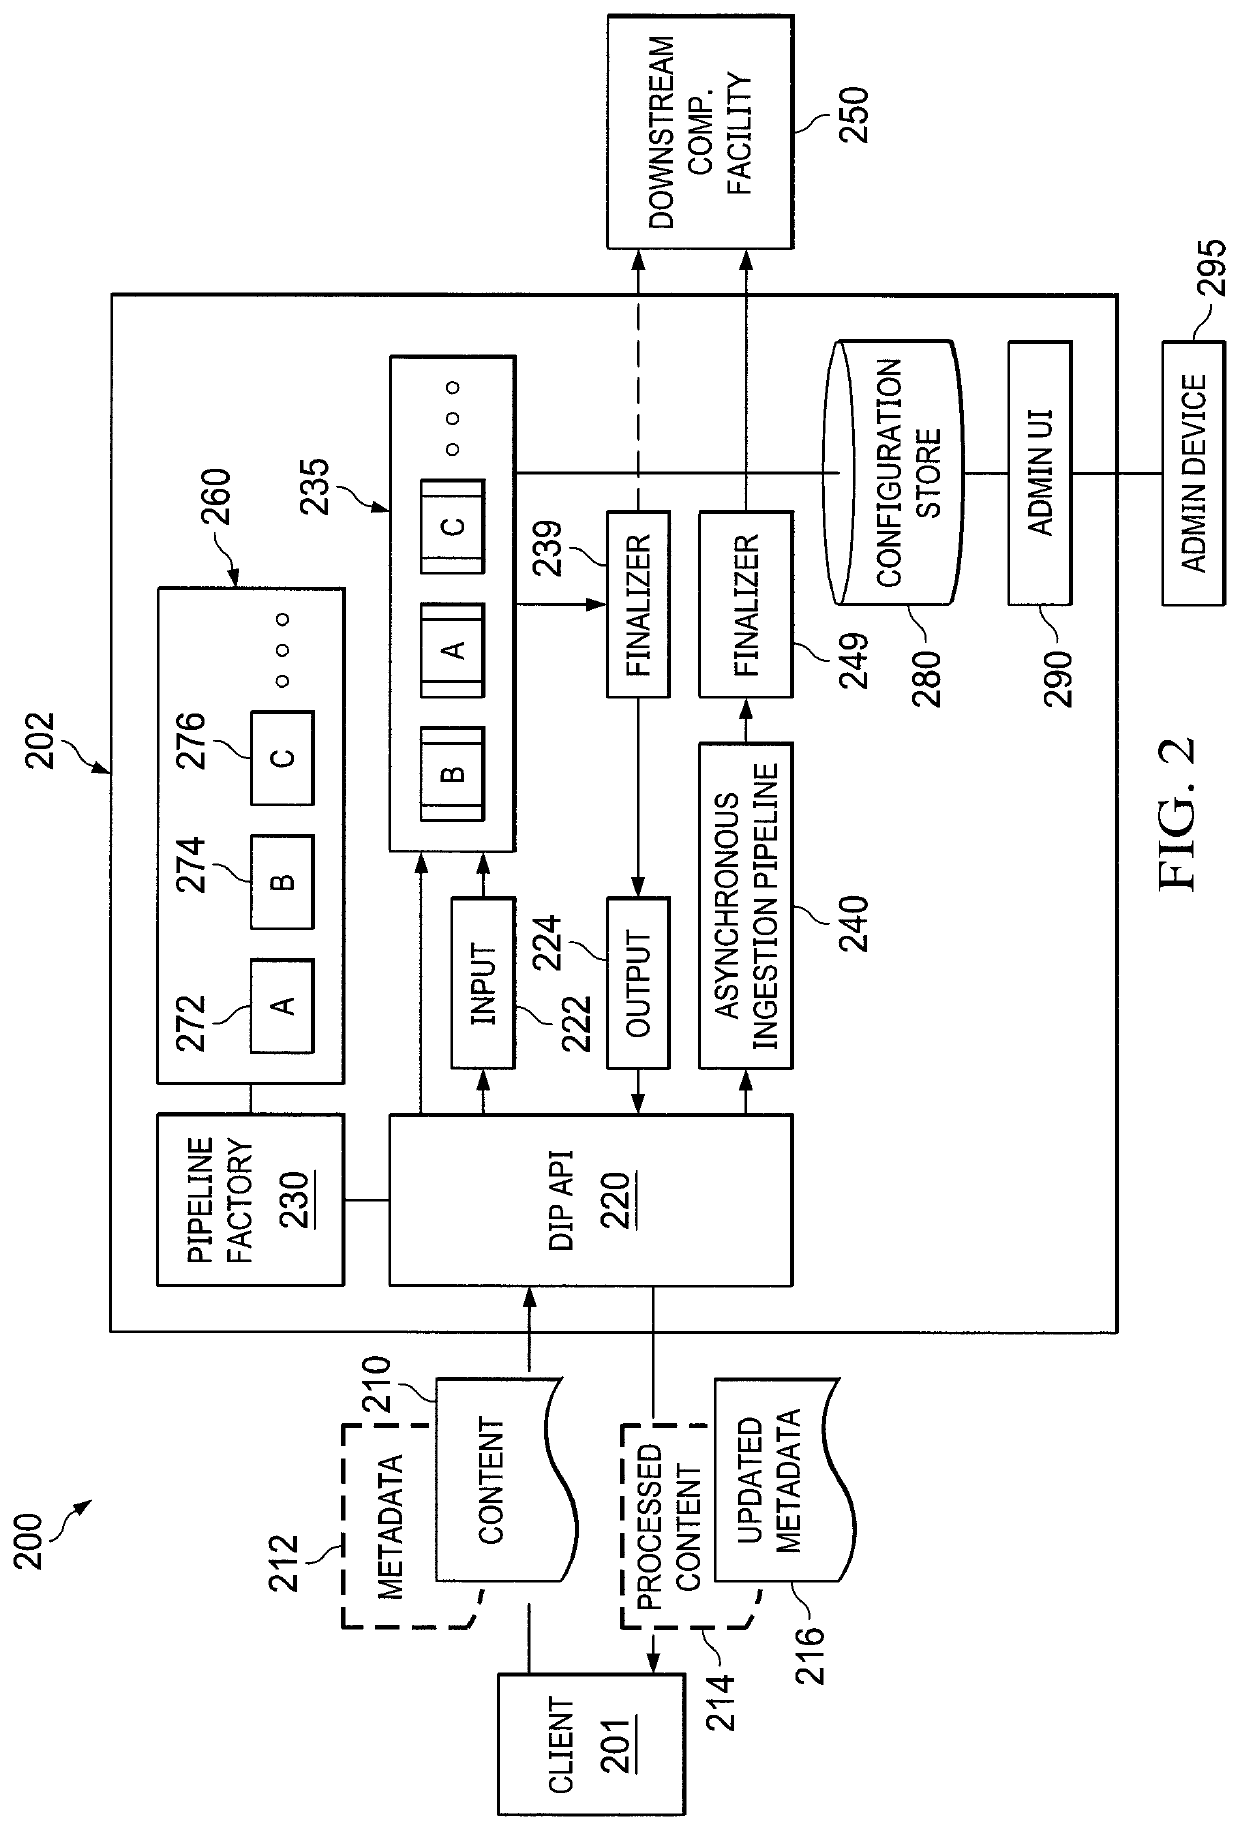 Synchronous ingestion pipeline for data processing